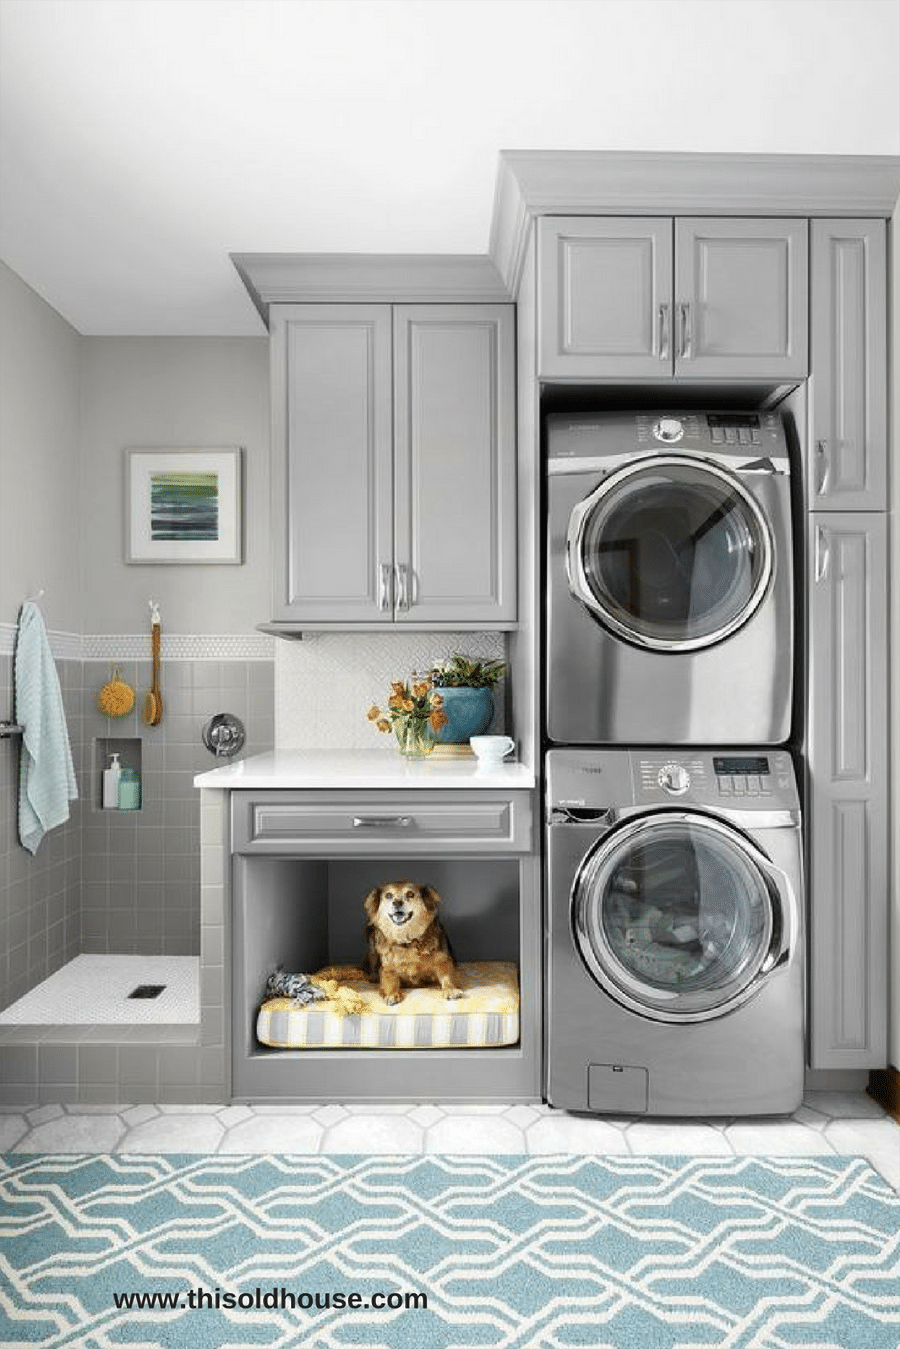 Problem 7 combined mudroom laundry room cabinetry storage with a pet | Innovate Home Org #LaundryRoomPet #Laundryroomsystems #modernmudroom